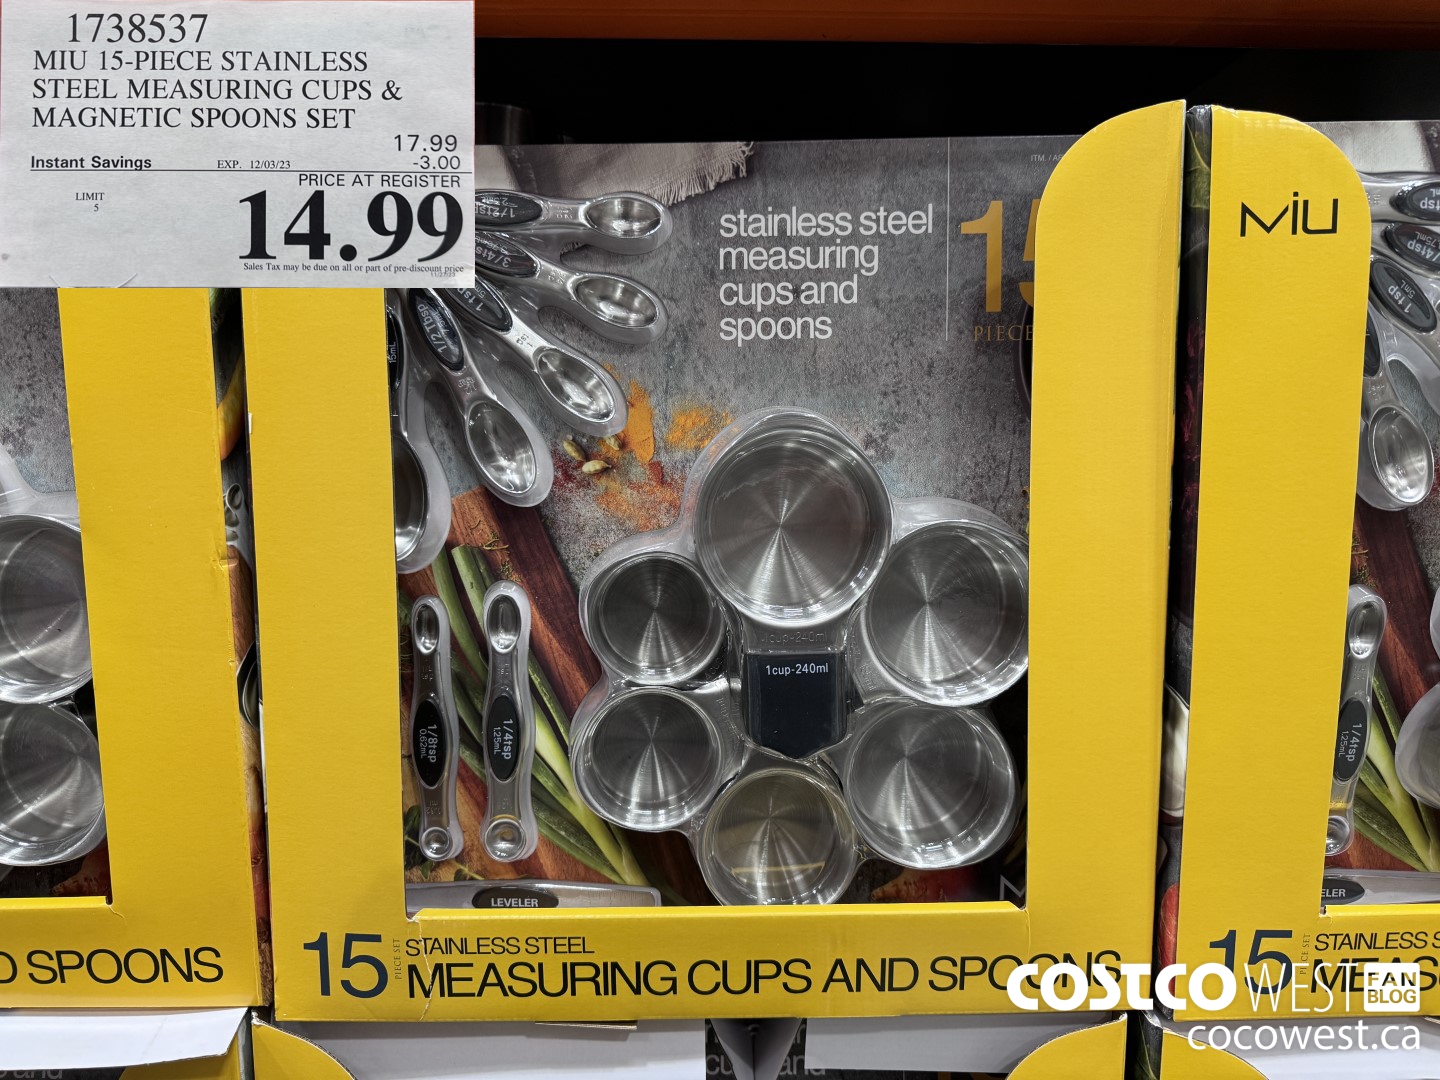 https://west.cocowest1.ca/2023/11/MIU_15PIECE_STAINLESS_STEEL_MEASURING_CUPS__MAGNETIC_SPOONS_SET_20231129_147303.jpg